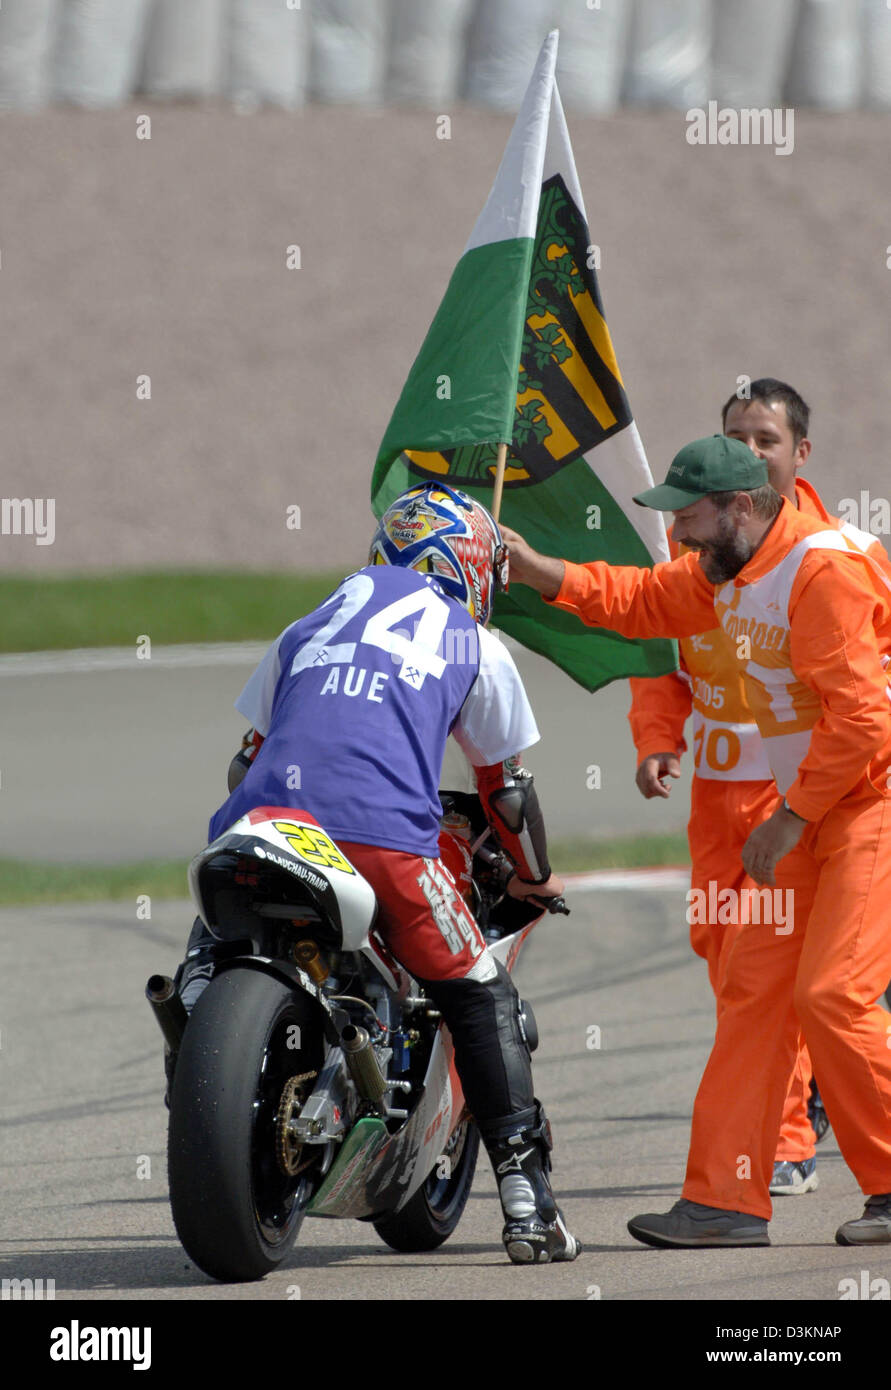 (dpa) - German motorbike pilot Dirk Heidolf gets a flag of Saxonia and a jersey of Wismut Aue from a track post after the 250cc category race at the Sachsenring race track near Hohenstein-Ernstthal, Germany, Sunday 31 July 2005. The honda pilot who finished the race in 13th place comes from Hohenstein-Ernstthal, Germany. Photo: Matthias Hiekel Stock Photo